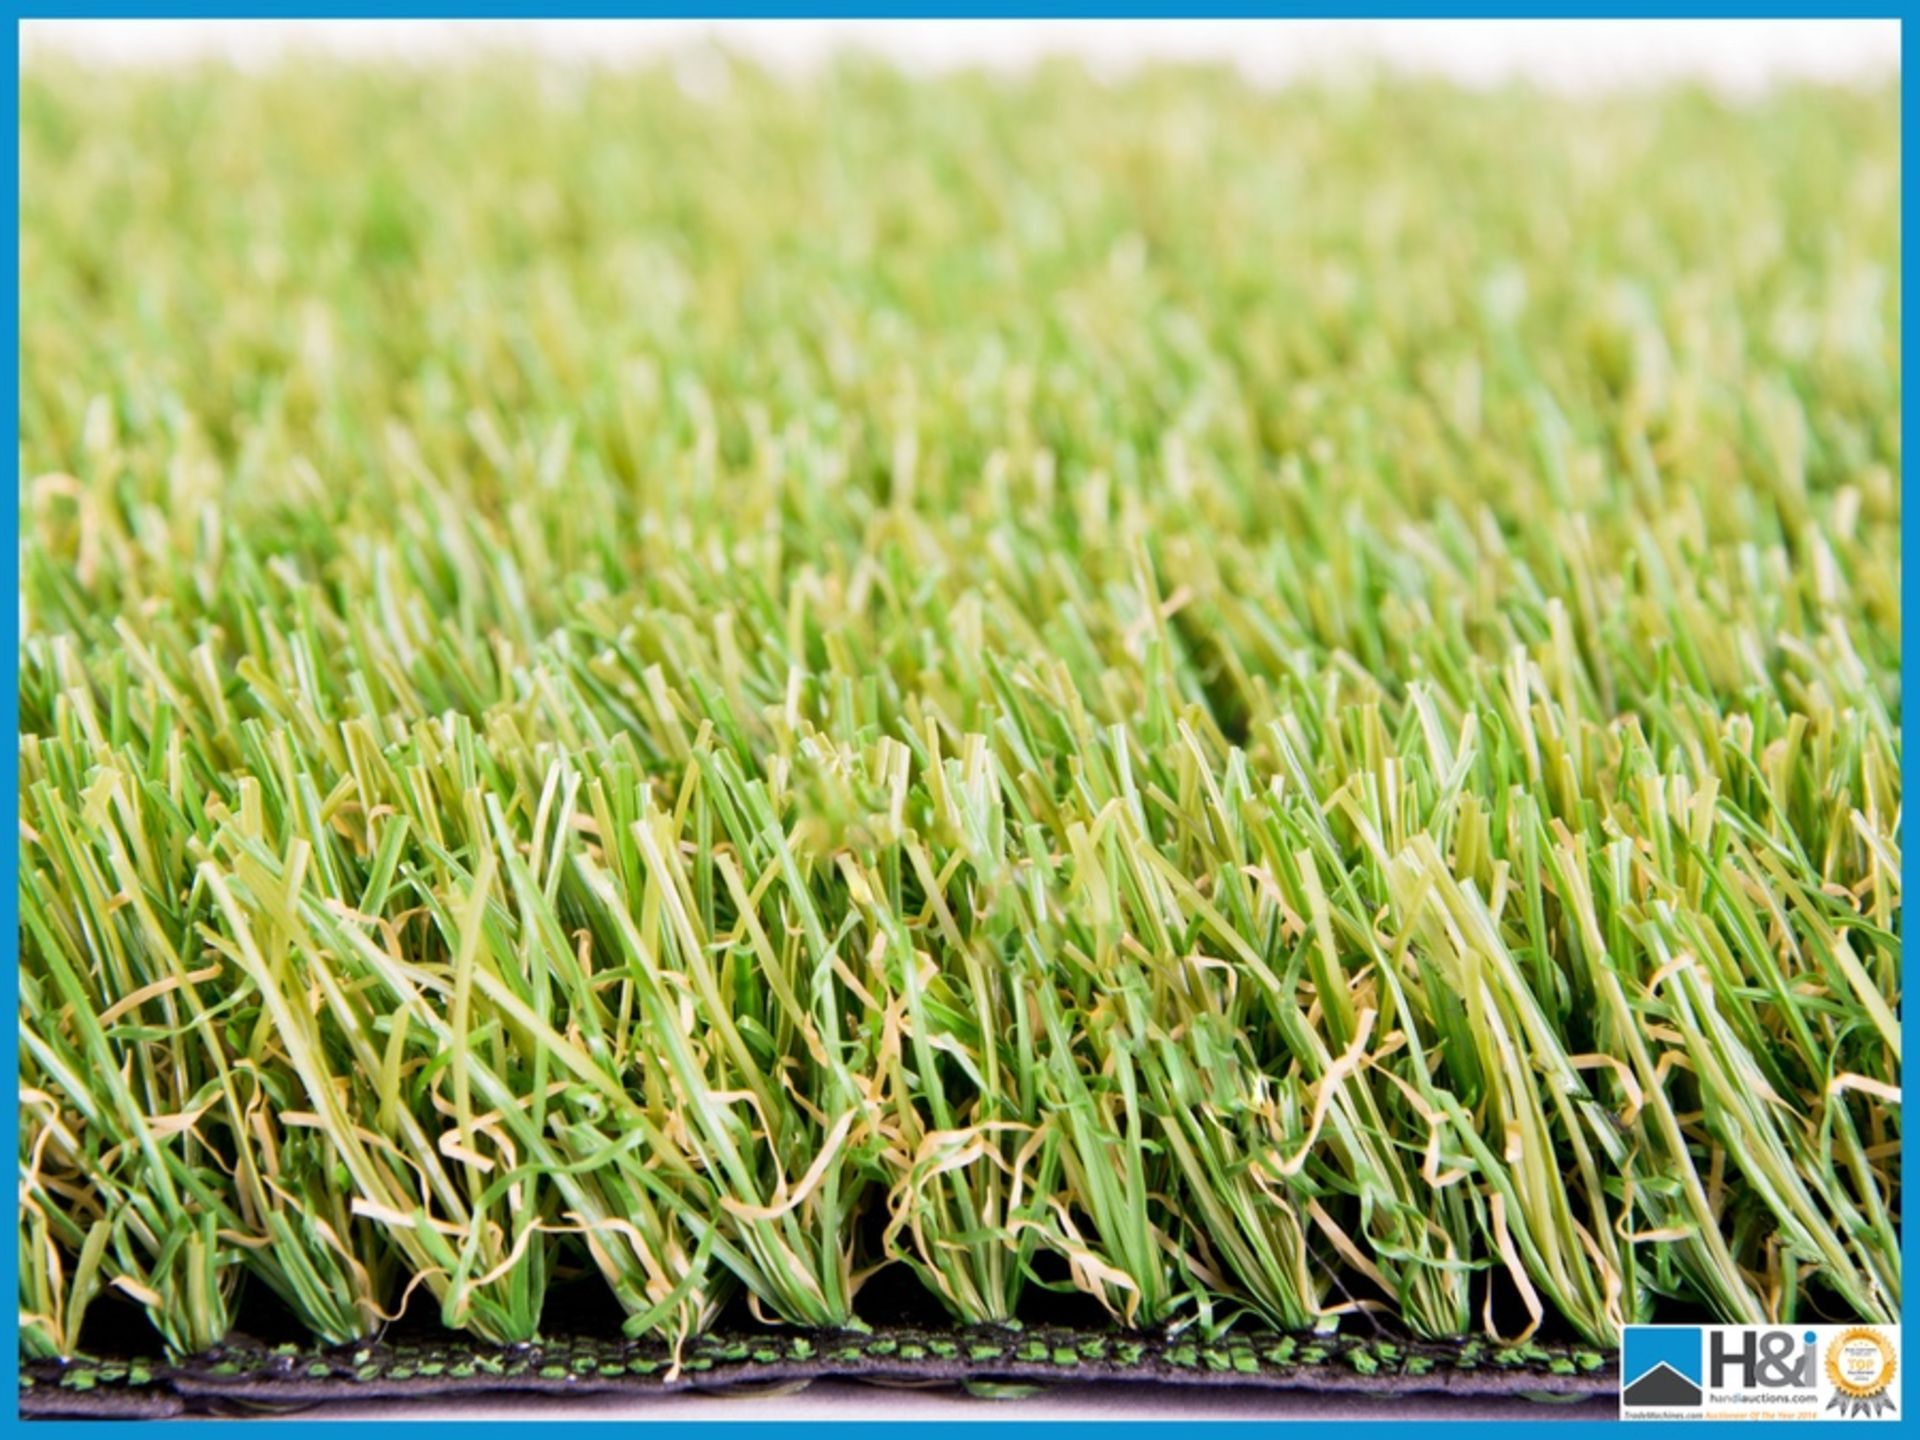 Ultra high-quality 'Woodthorpe' artificial grass. Useage applications, commercial and domestic, - Image 2 of 4